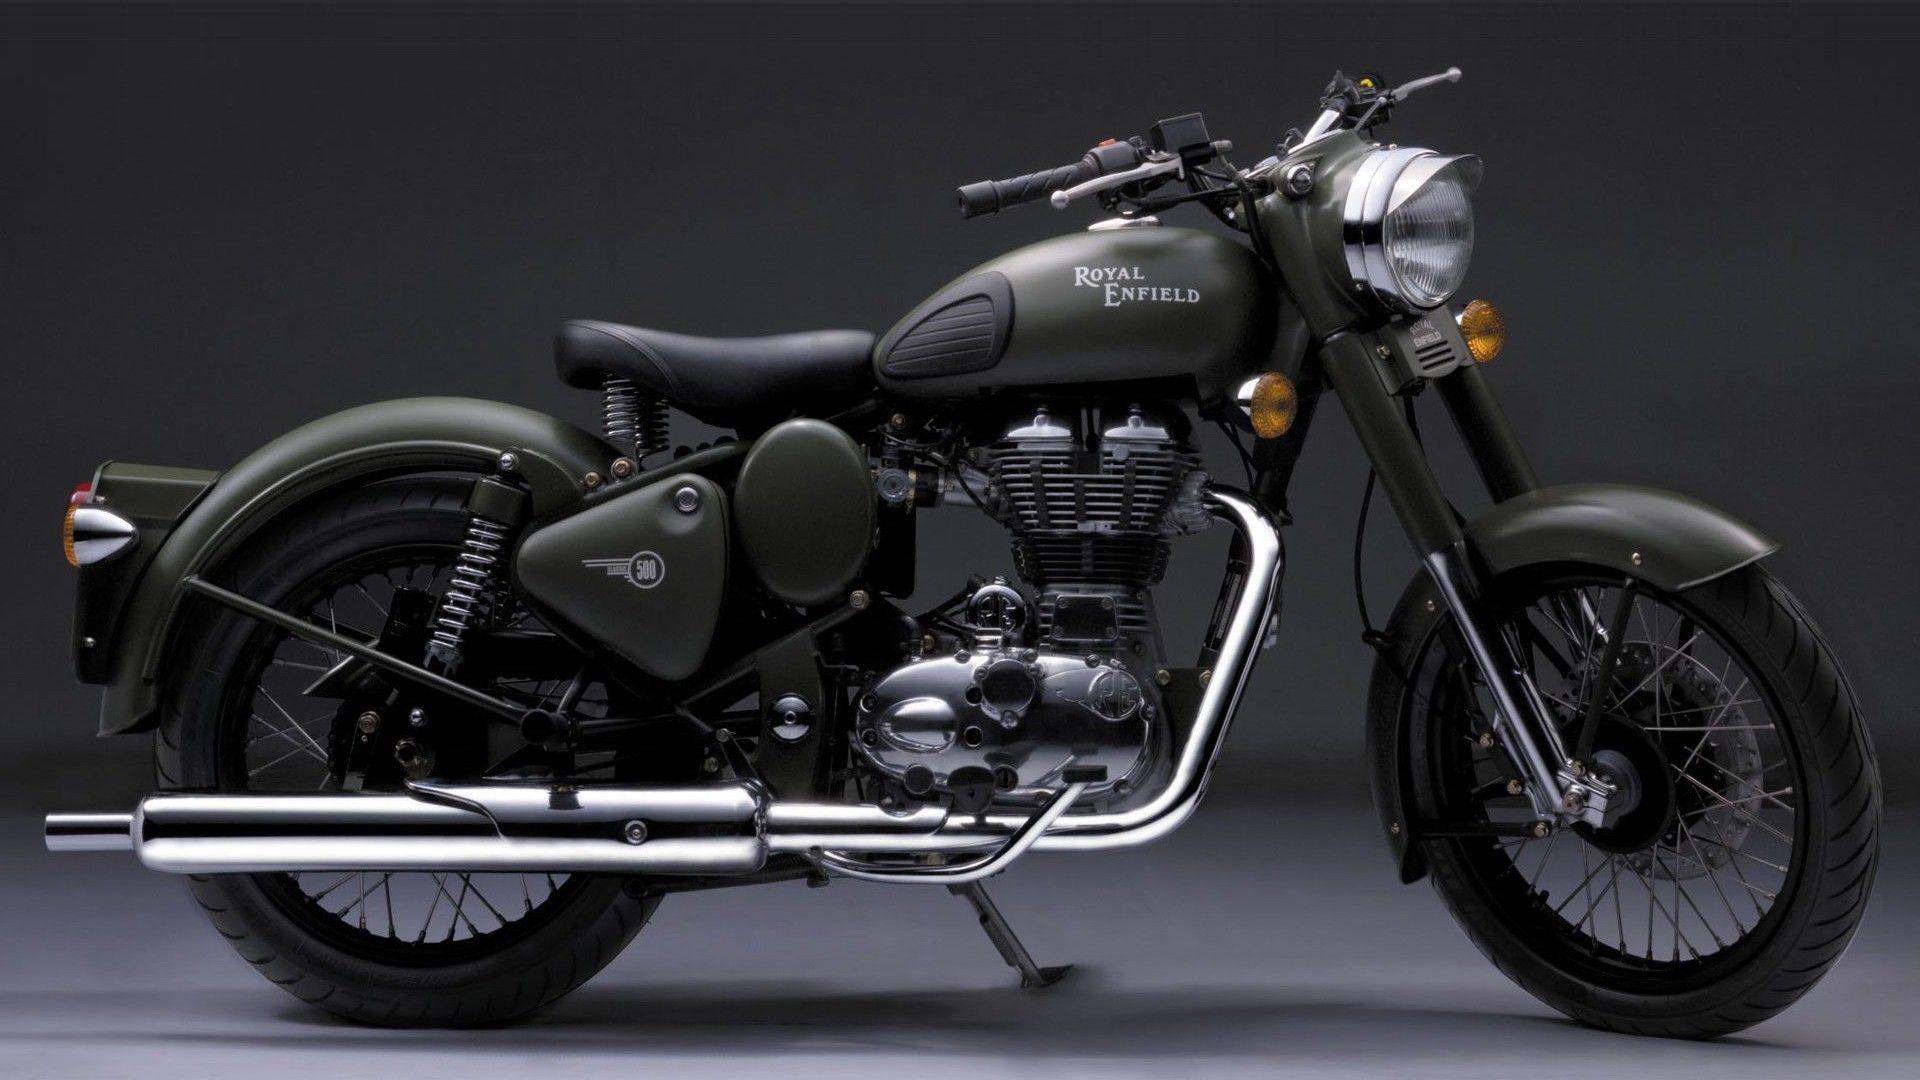 Royal Enfield 350 Classic Wallpapers - Wallpaper Cave